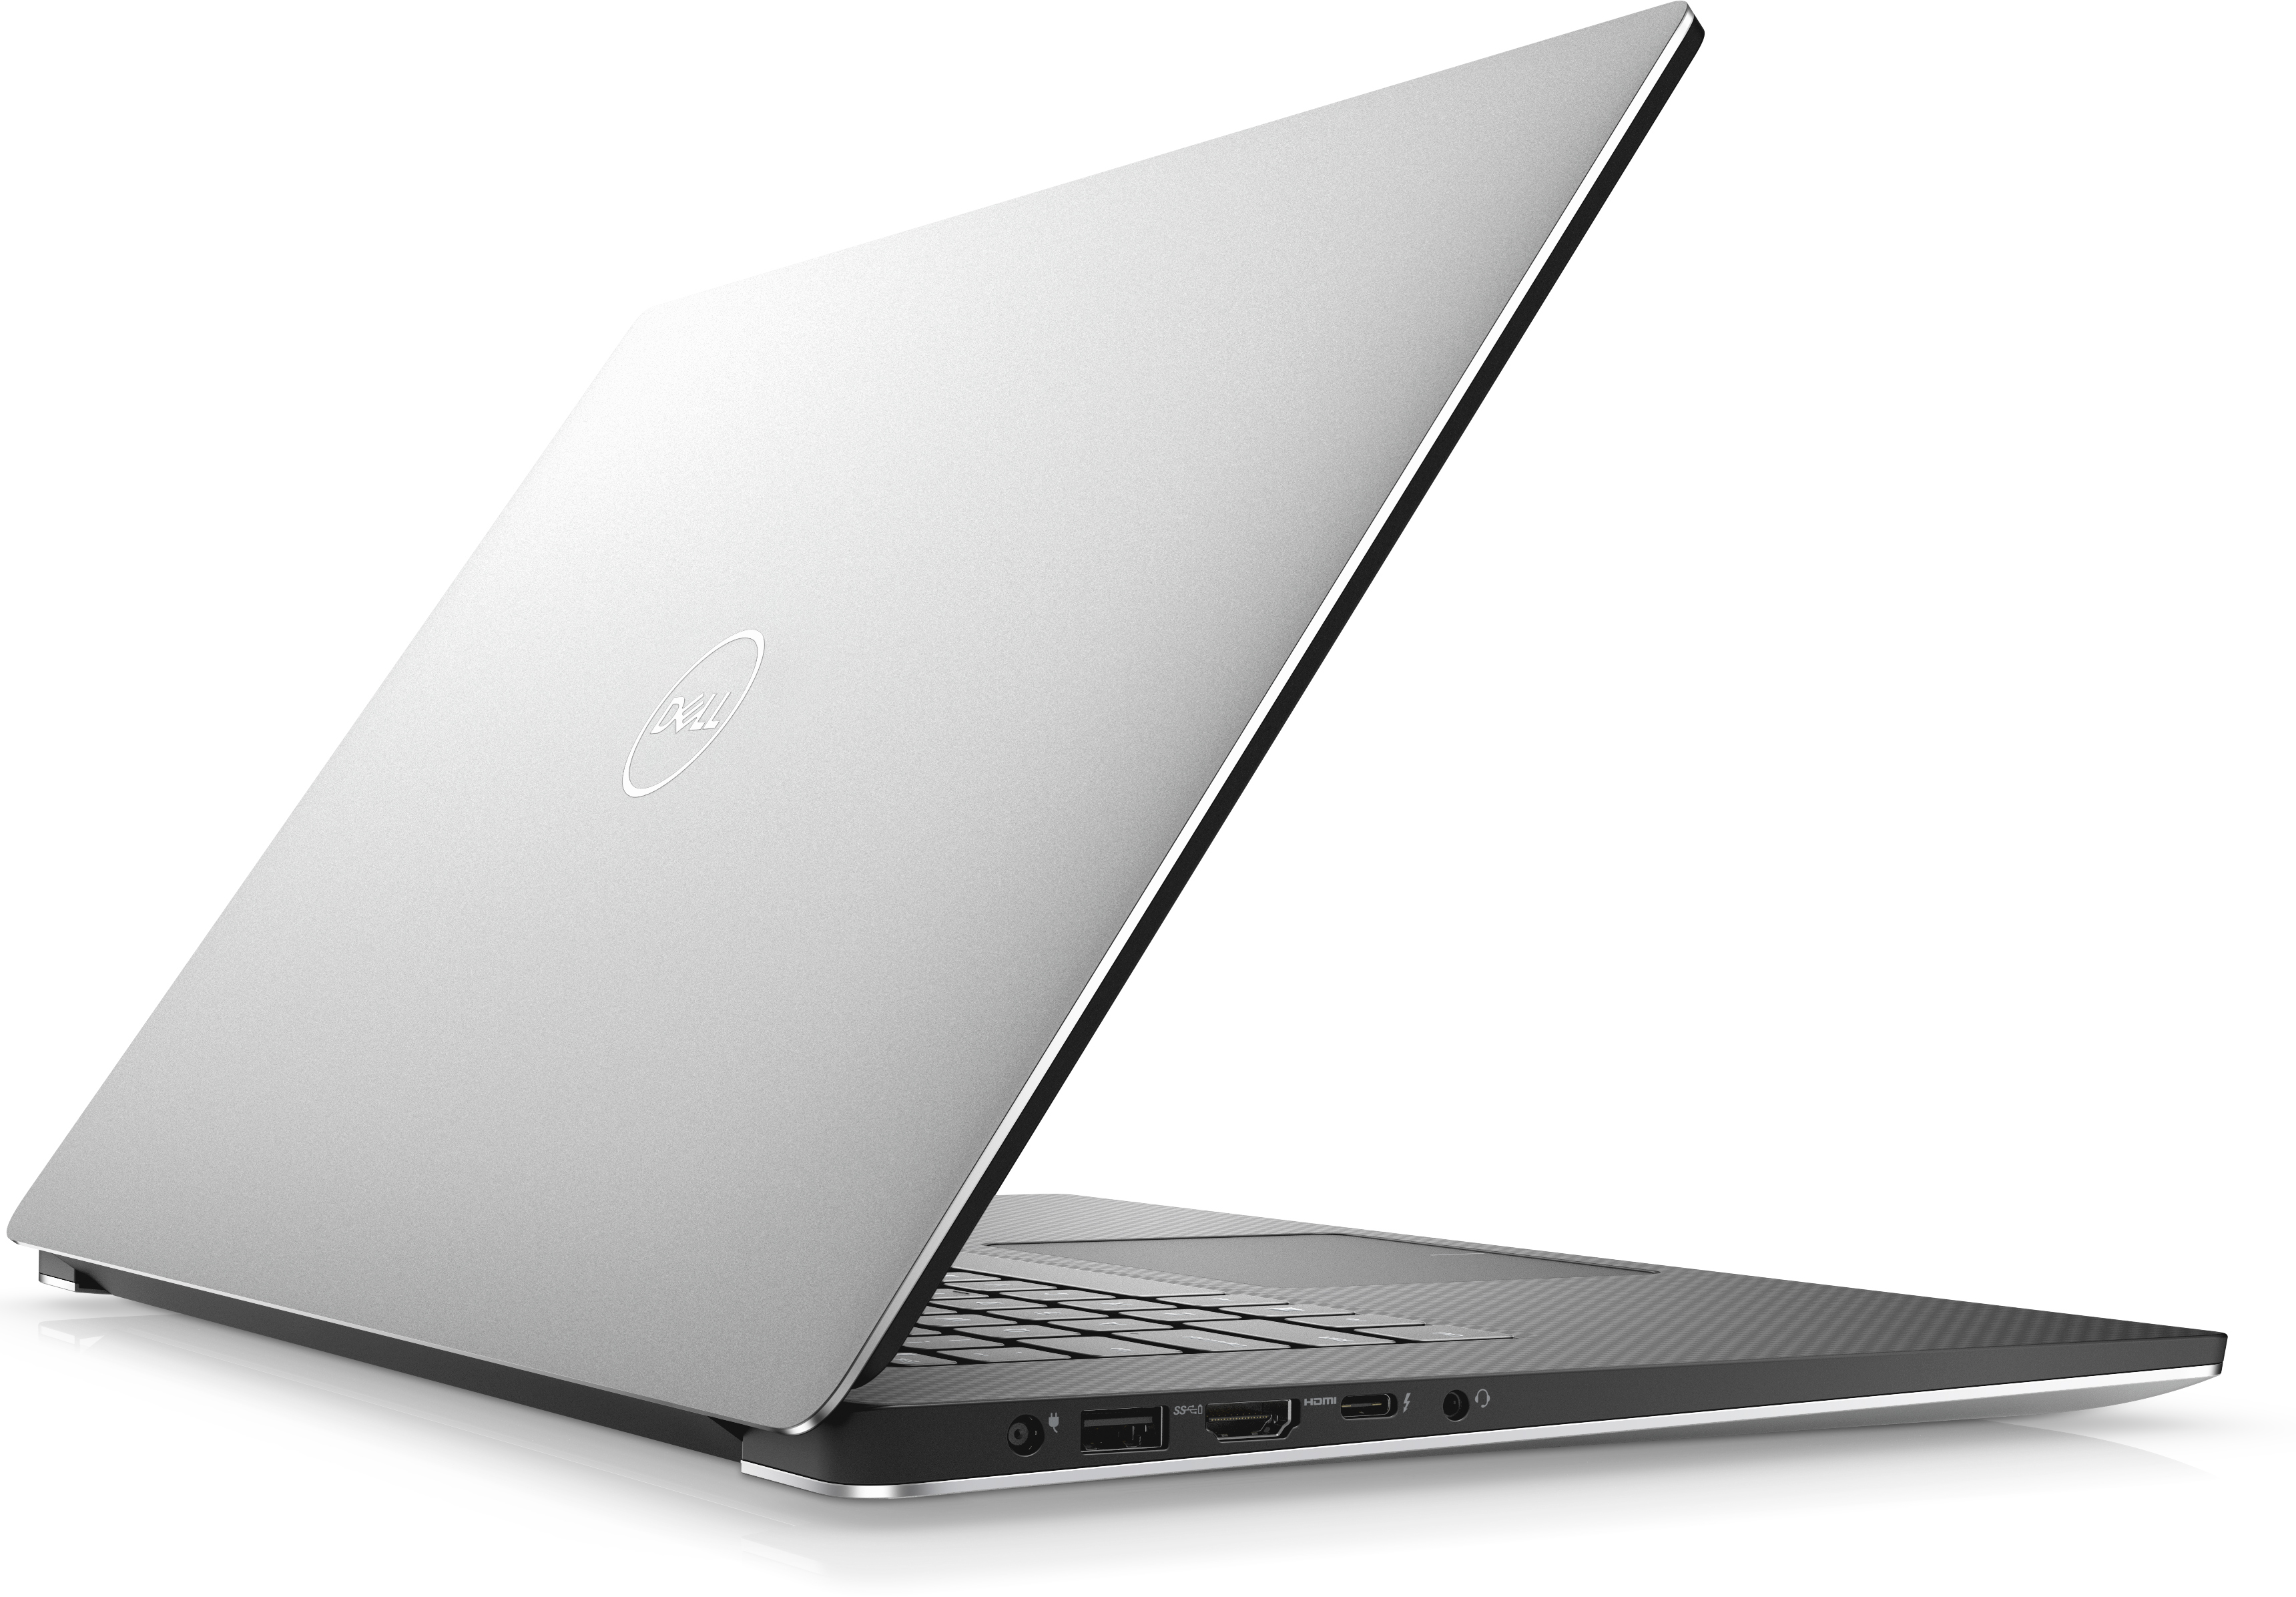 Dell XPS 15 (9570) - Specs, Tests, and Prices | LaptopMedia.com